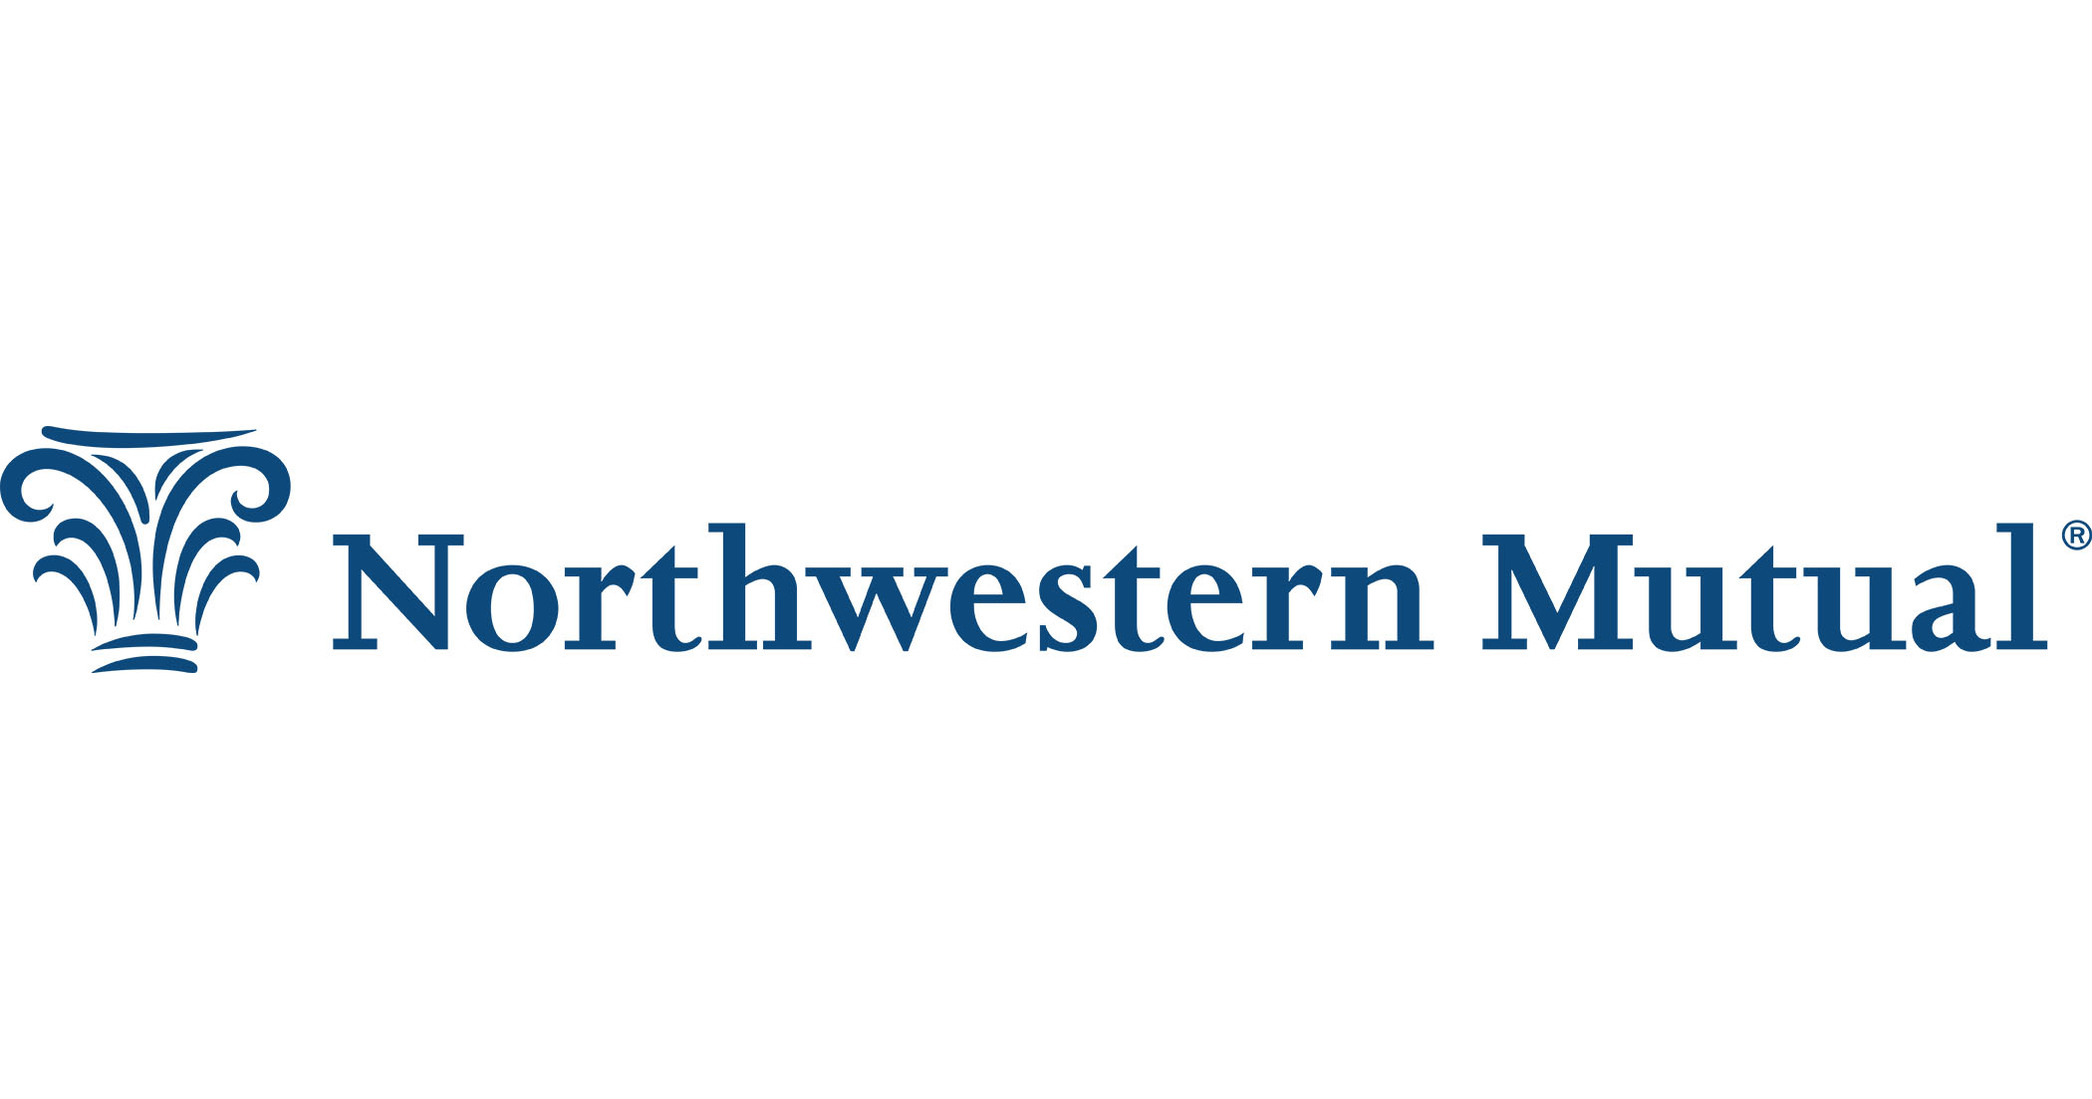 Featured Contact Bradley Behrens at Northwestern Mutual